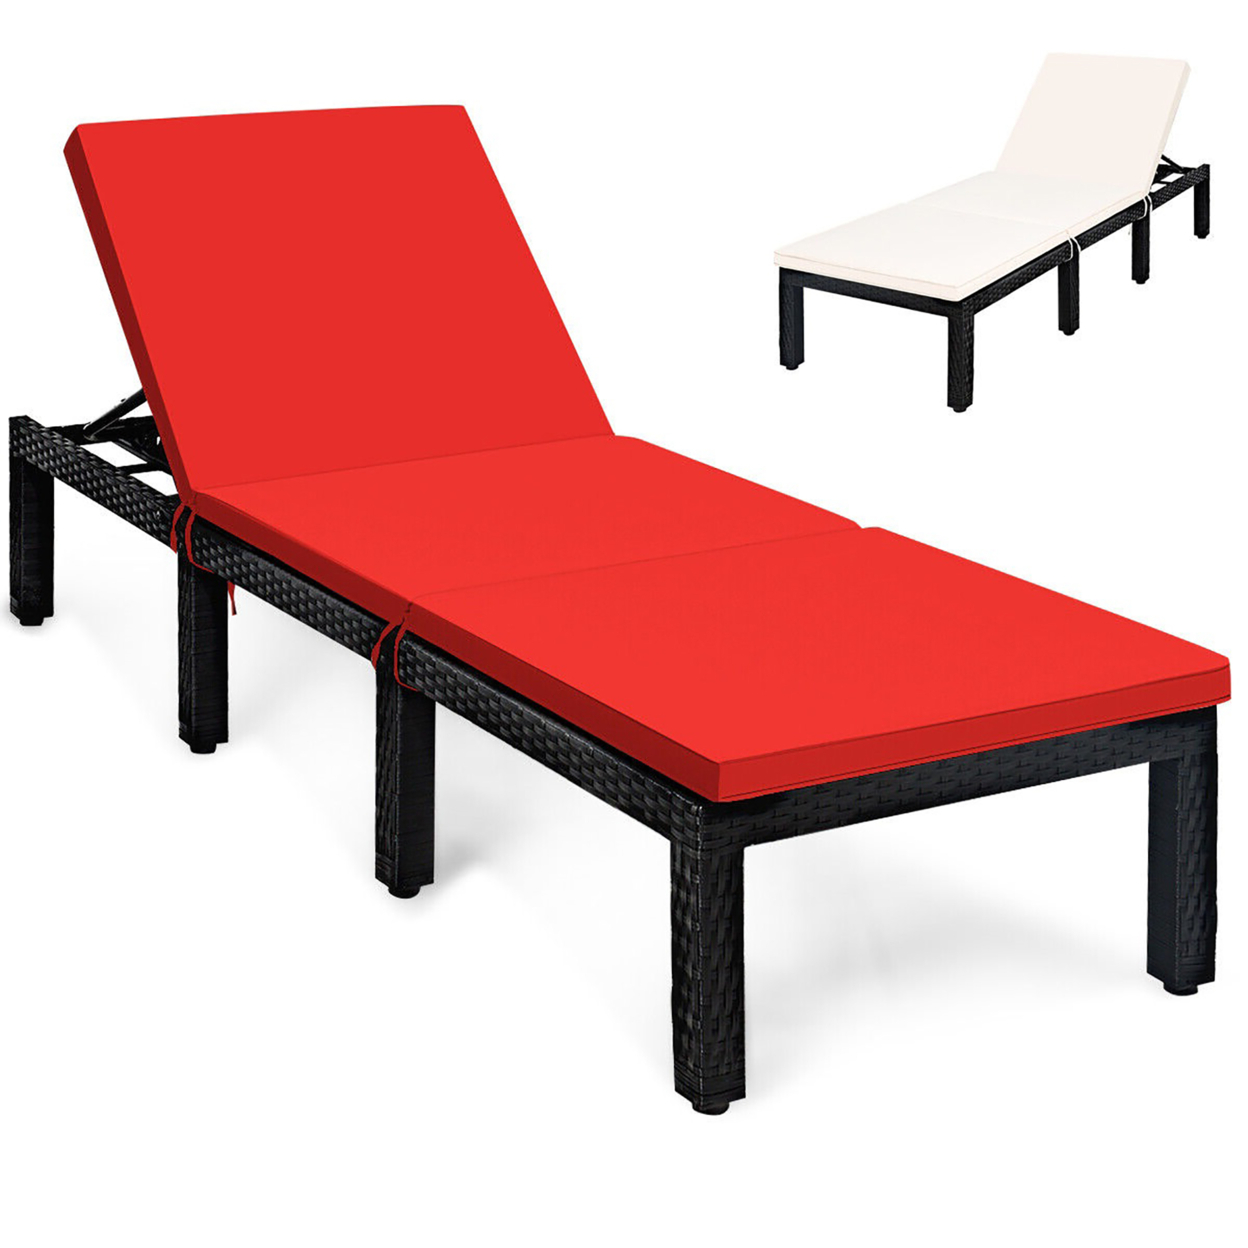 Patio Lounge Chair Rattan Chaise W/ Adjustable Navy/Red & Off White Cushioned - Red/Off White